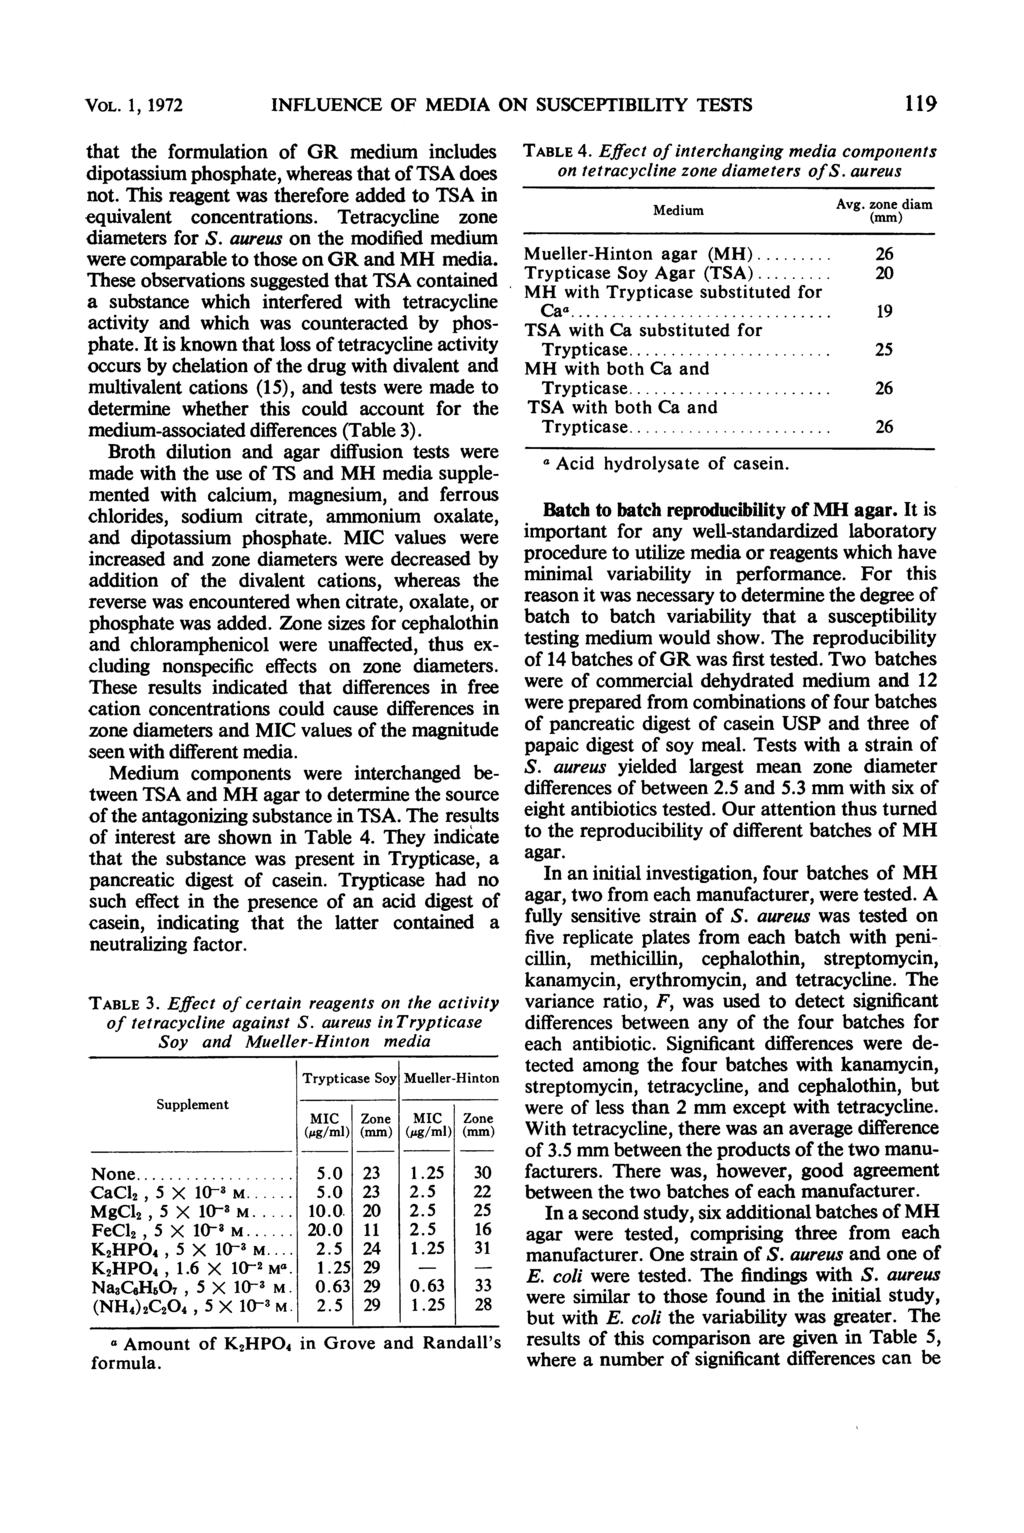 VOL. 1, 1972 INFLUENCE OF MEDIA ON SUSCEPTIBILITY TESTS 119 that the formulation of GR medium includes dipotassium phosphate, whereas that of TSA does not.